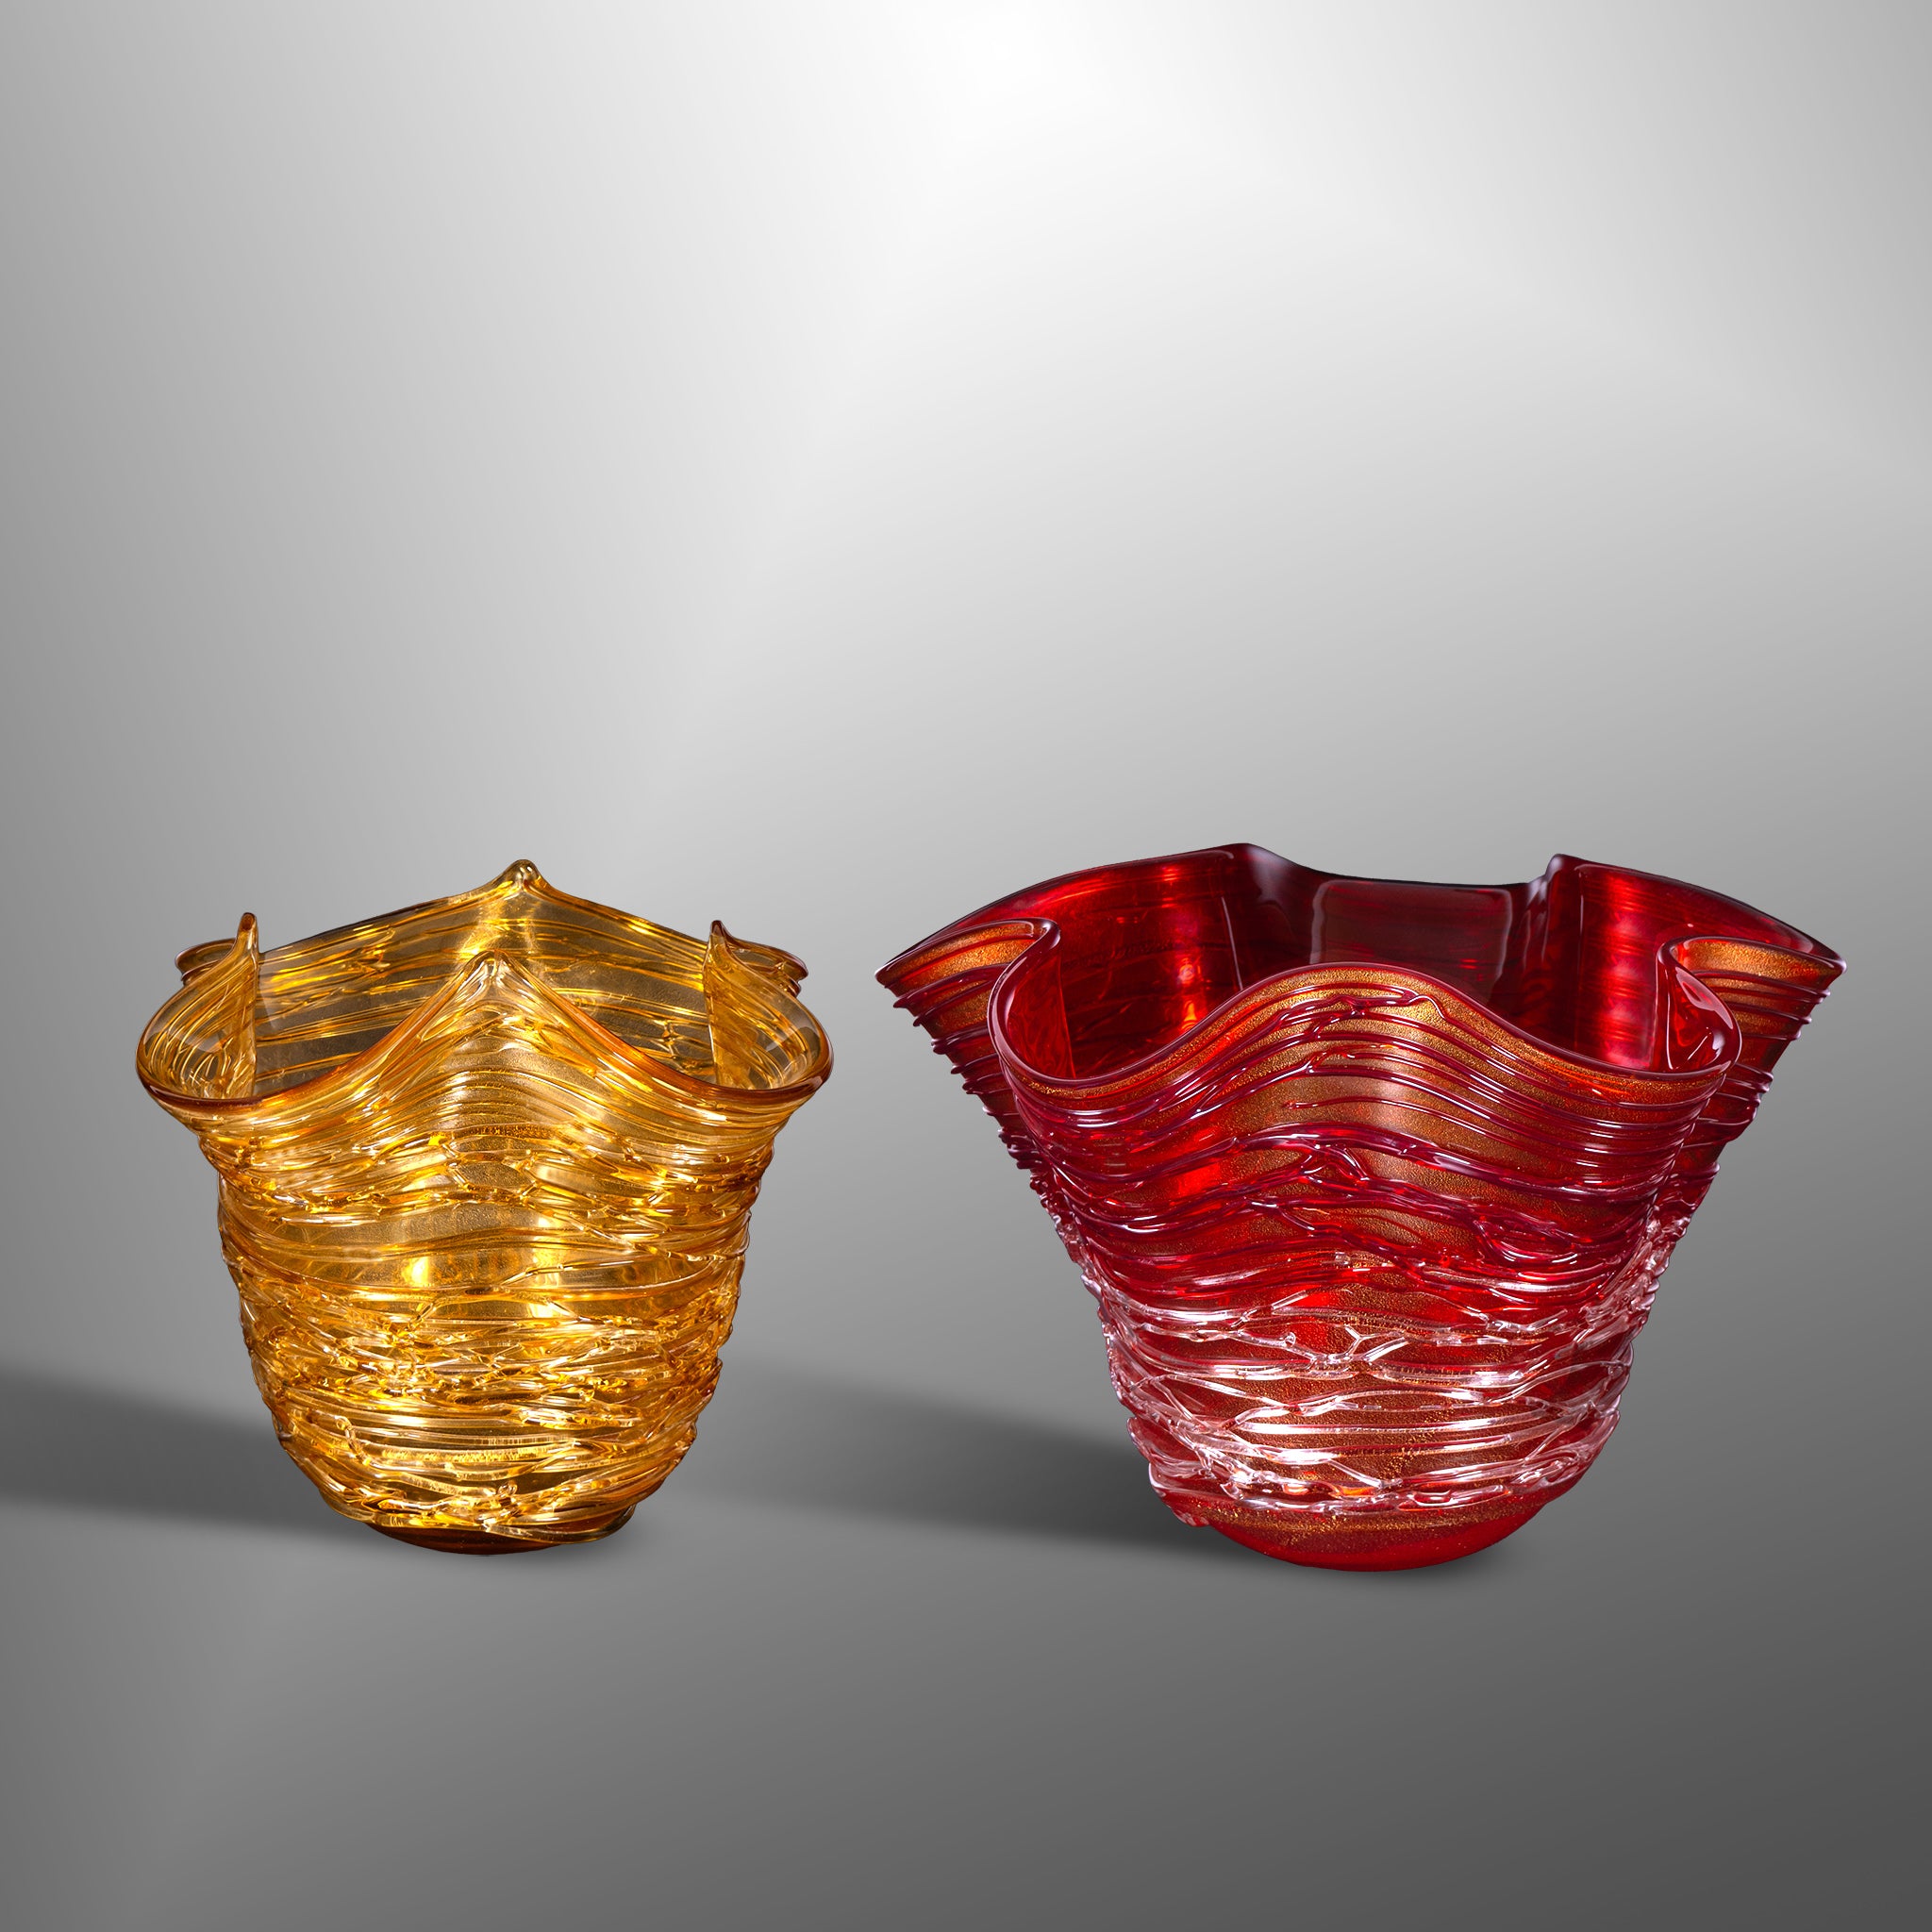 Vases with decoration